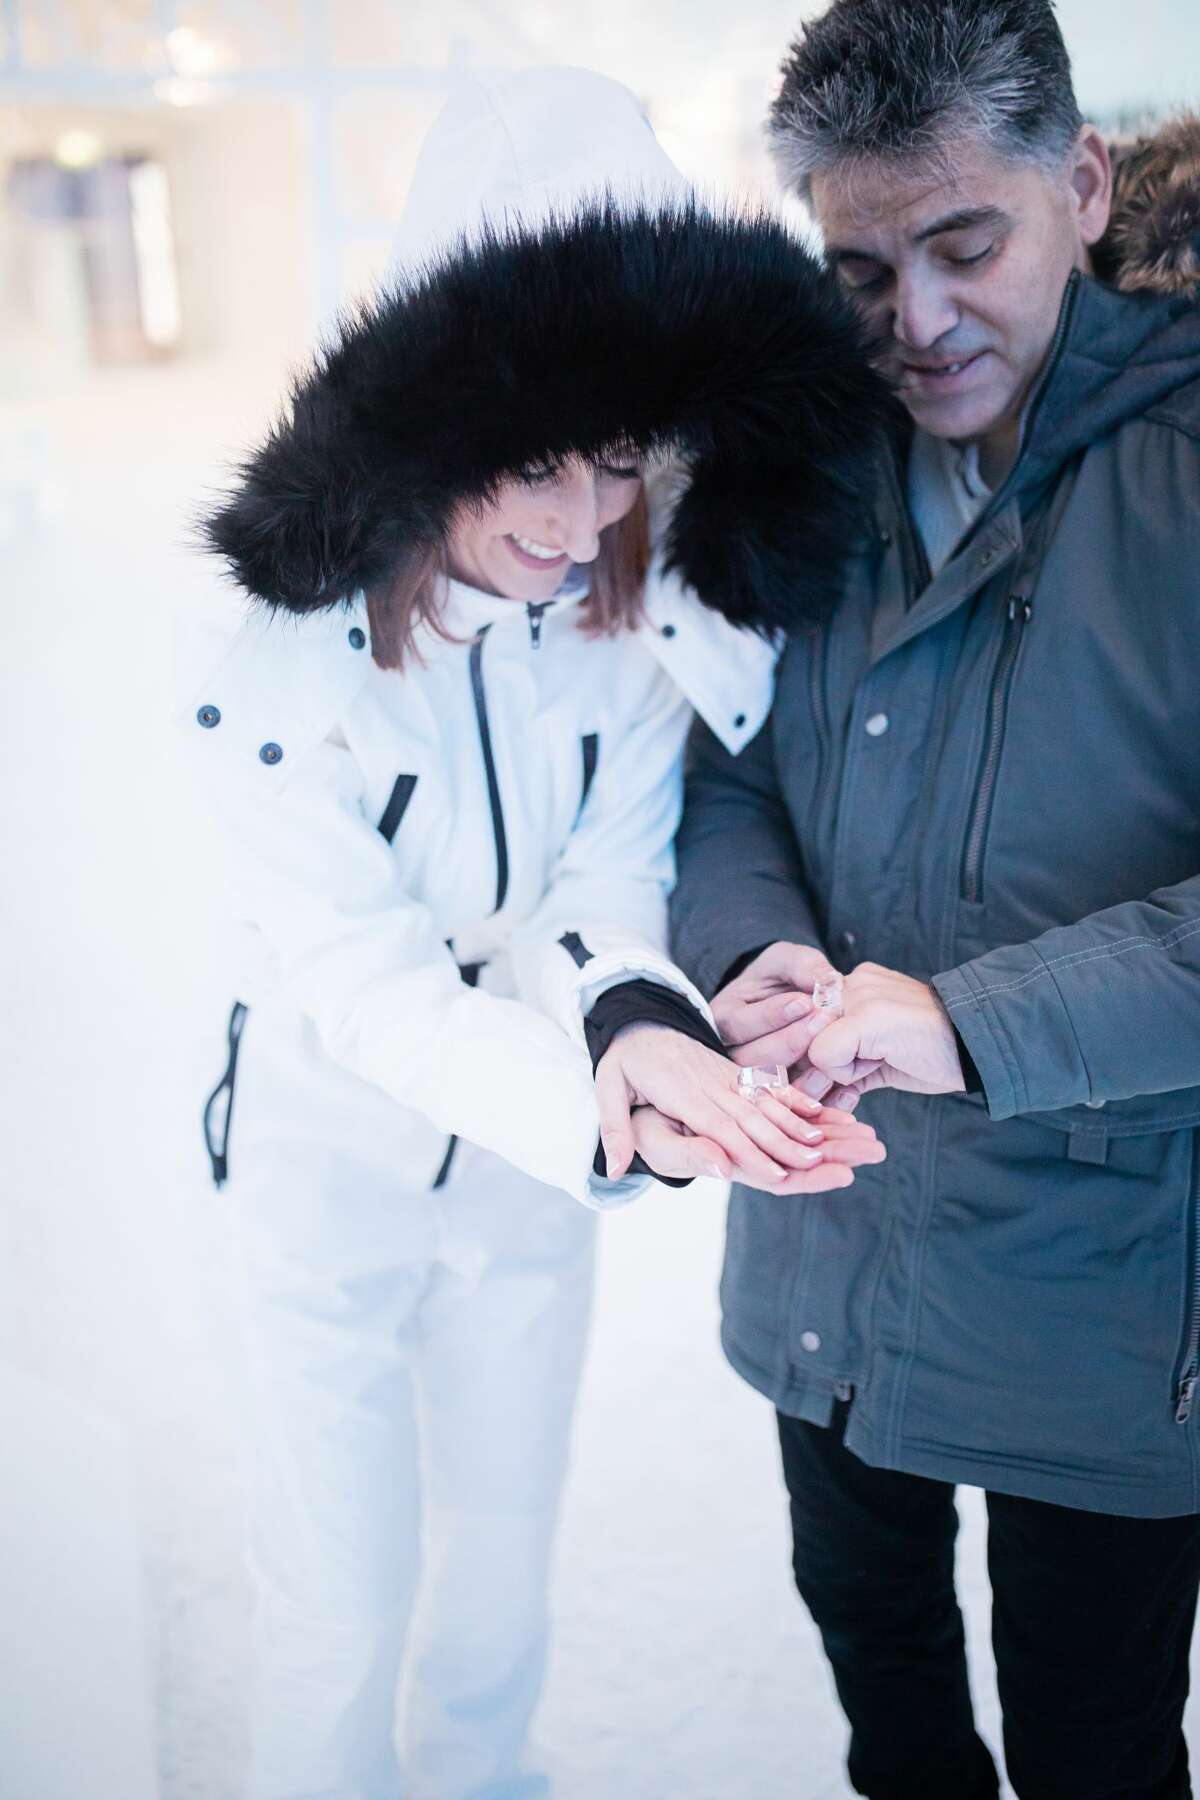 KHOU Consumer Reporter Tiffany Craig and her longtime boyfriend elope in Arctic Circle wedding.